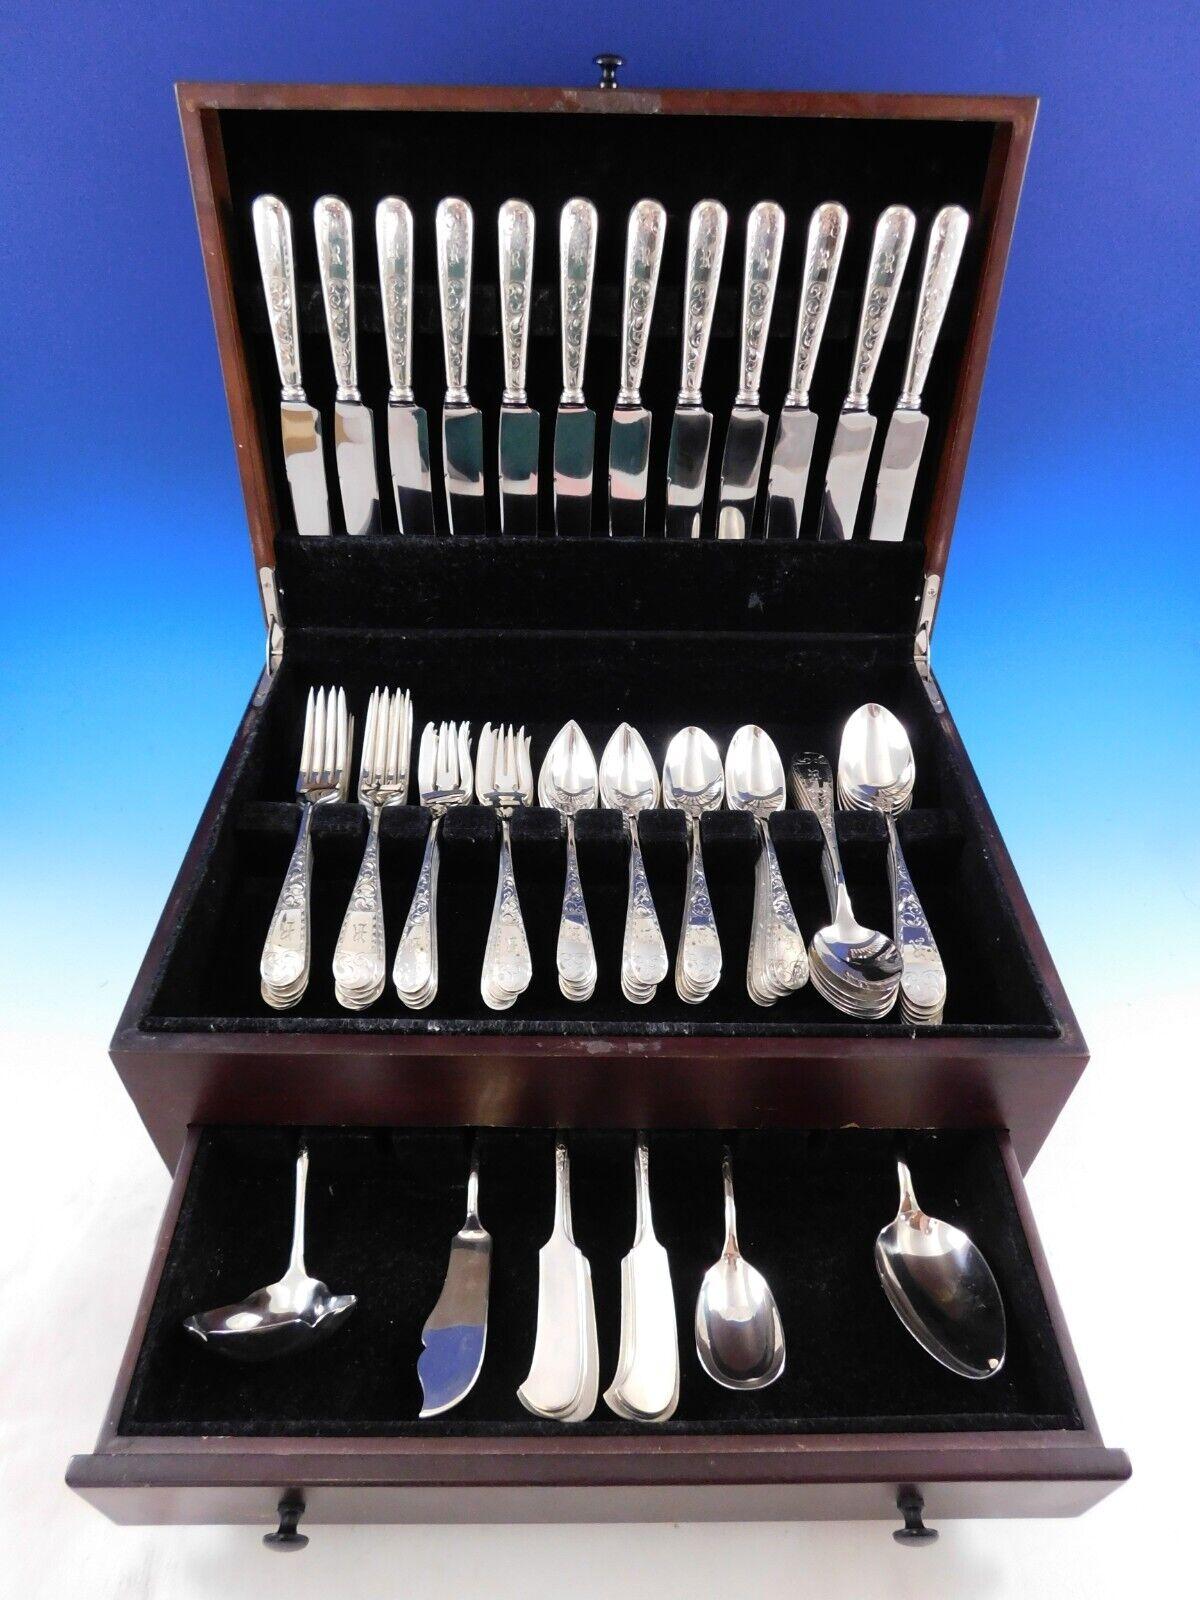 Scarce Mayflower by Schofield Sterling Silver Flatware set - 88 pieces. This set includes:

12 Knives, 8 7/8